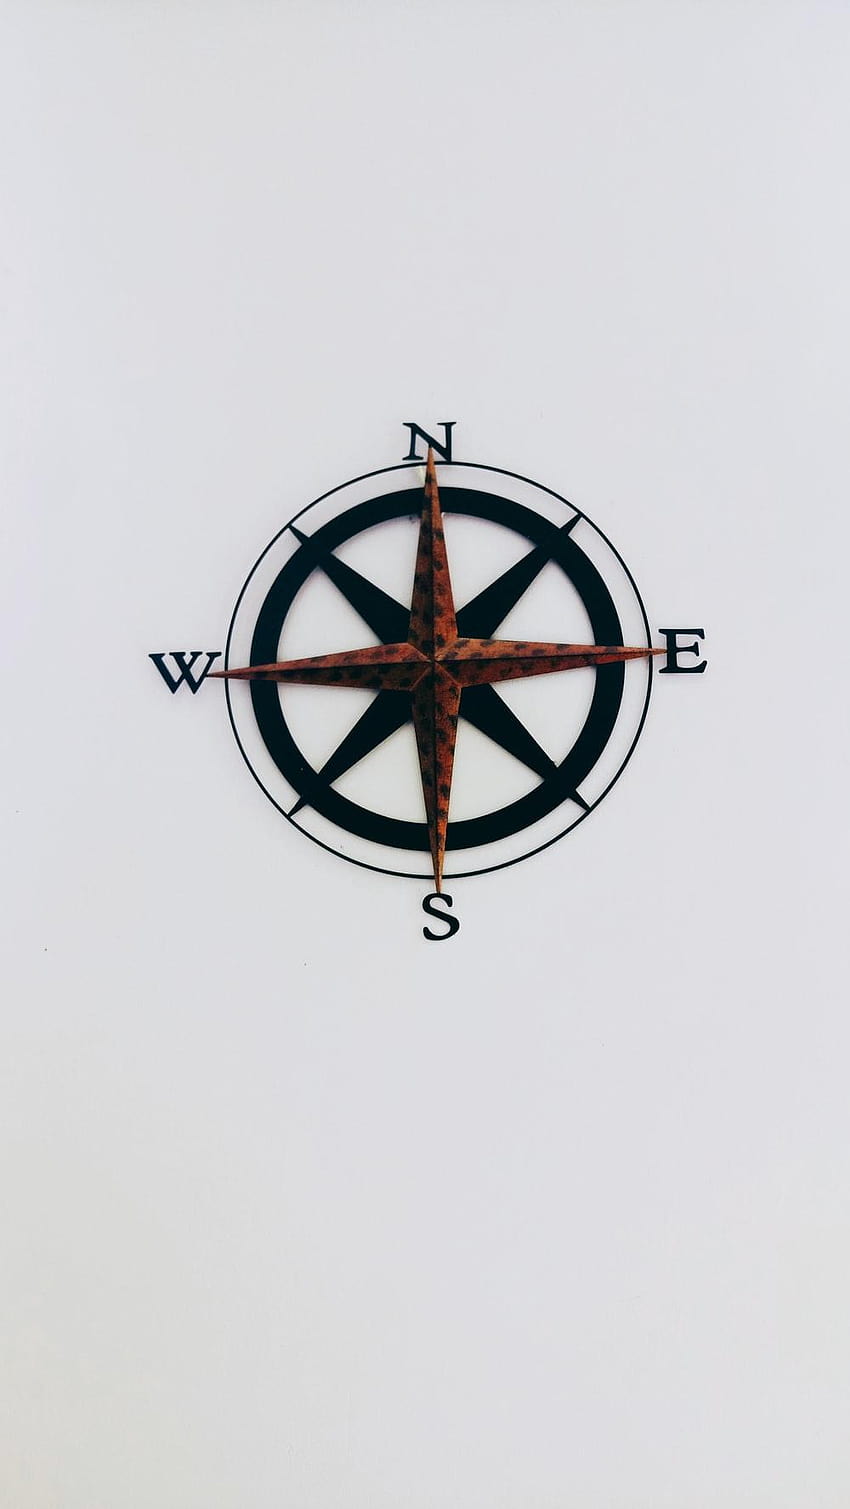 person using compass that leads to Loch Ness place, wanderlust compass iphone HD phone wallpaper